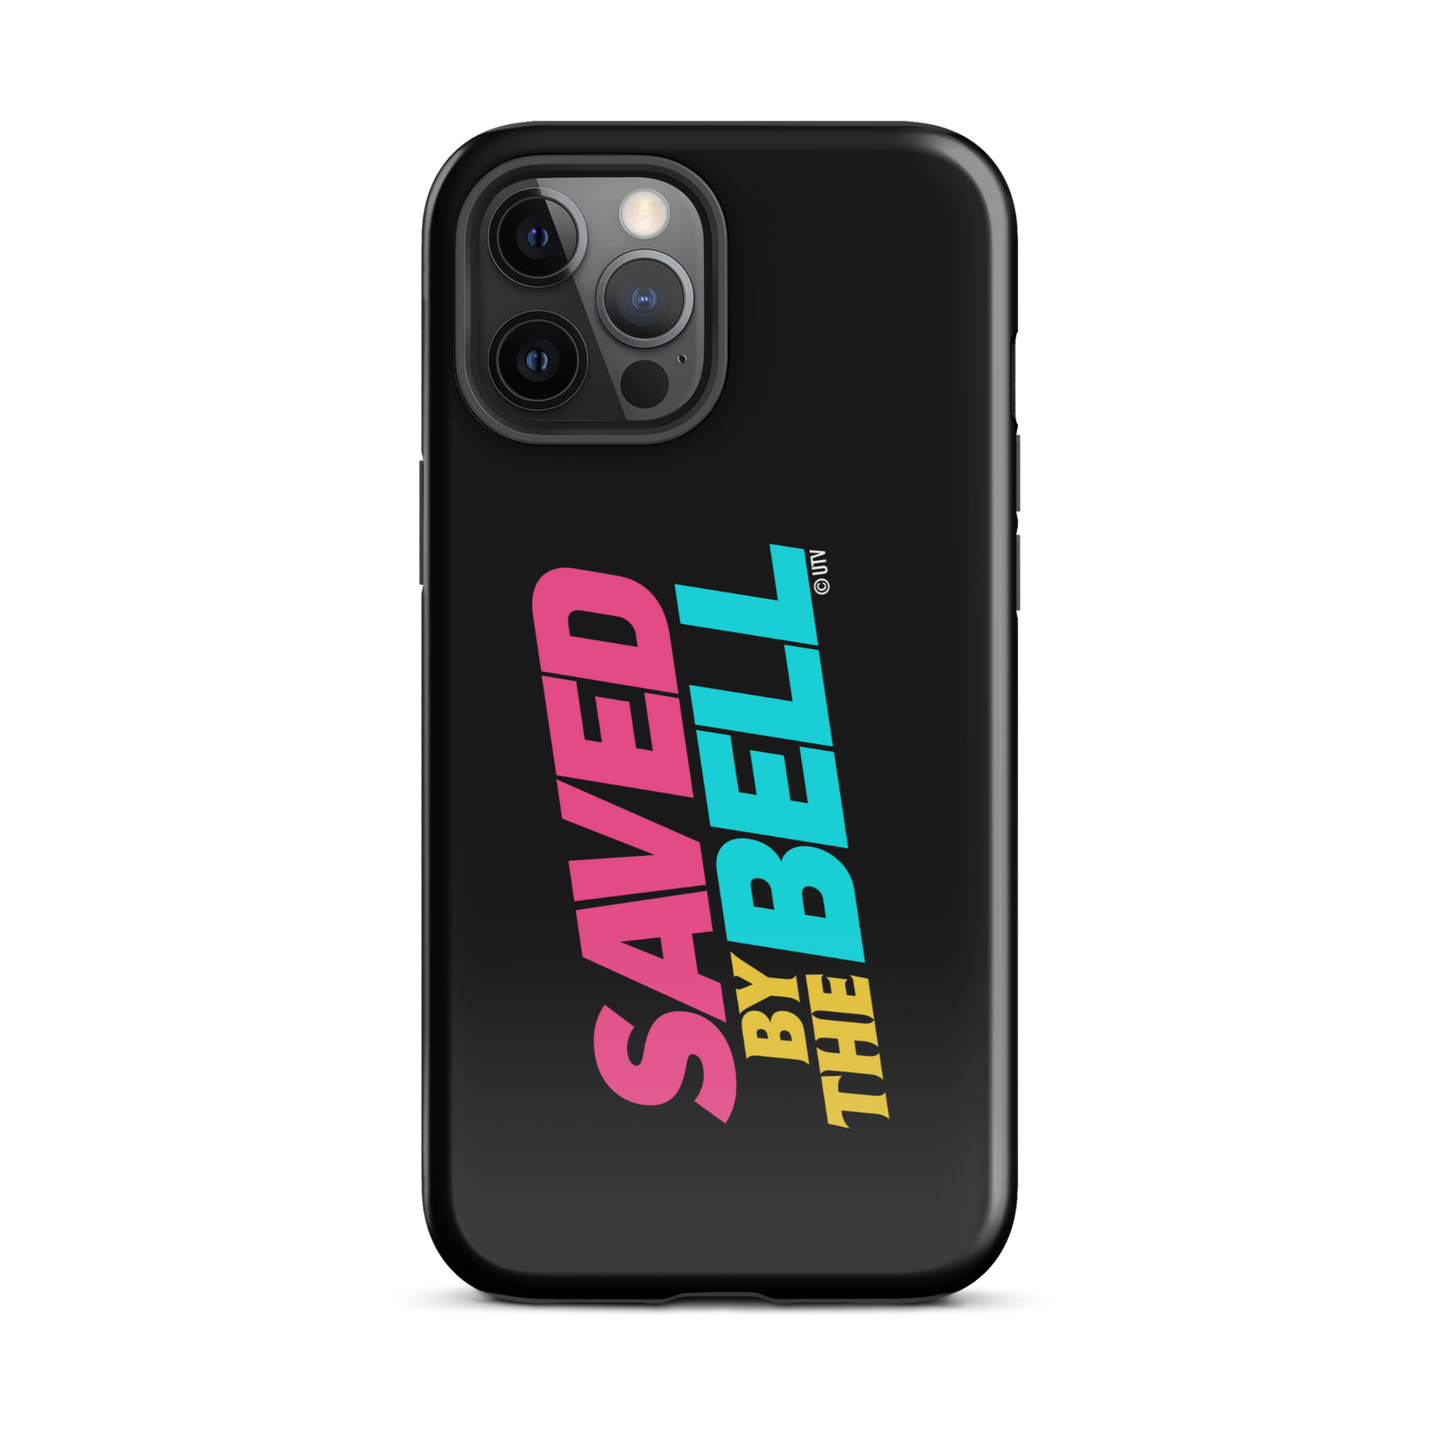 Saved by the Bell Logo Tough Phone Case - iPhone